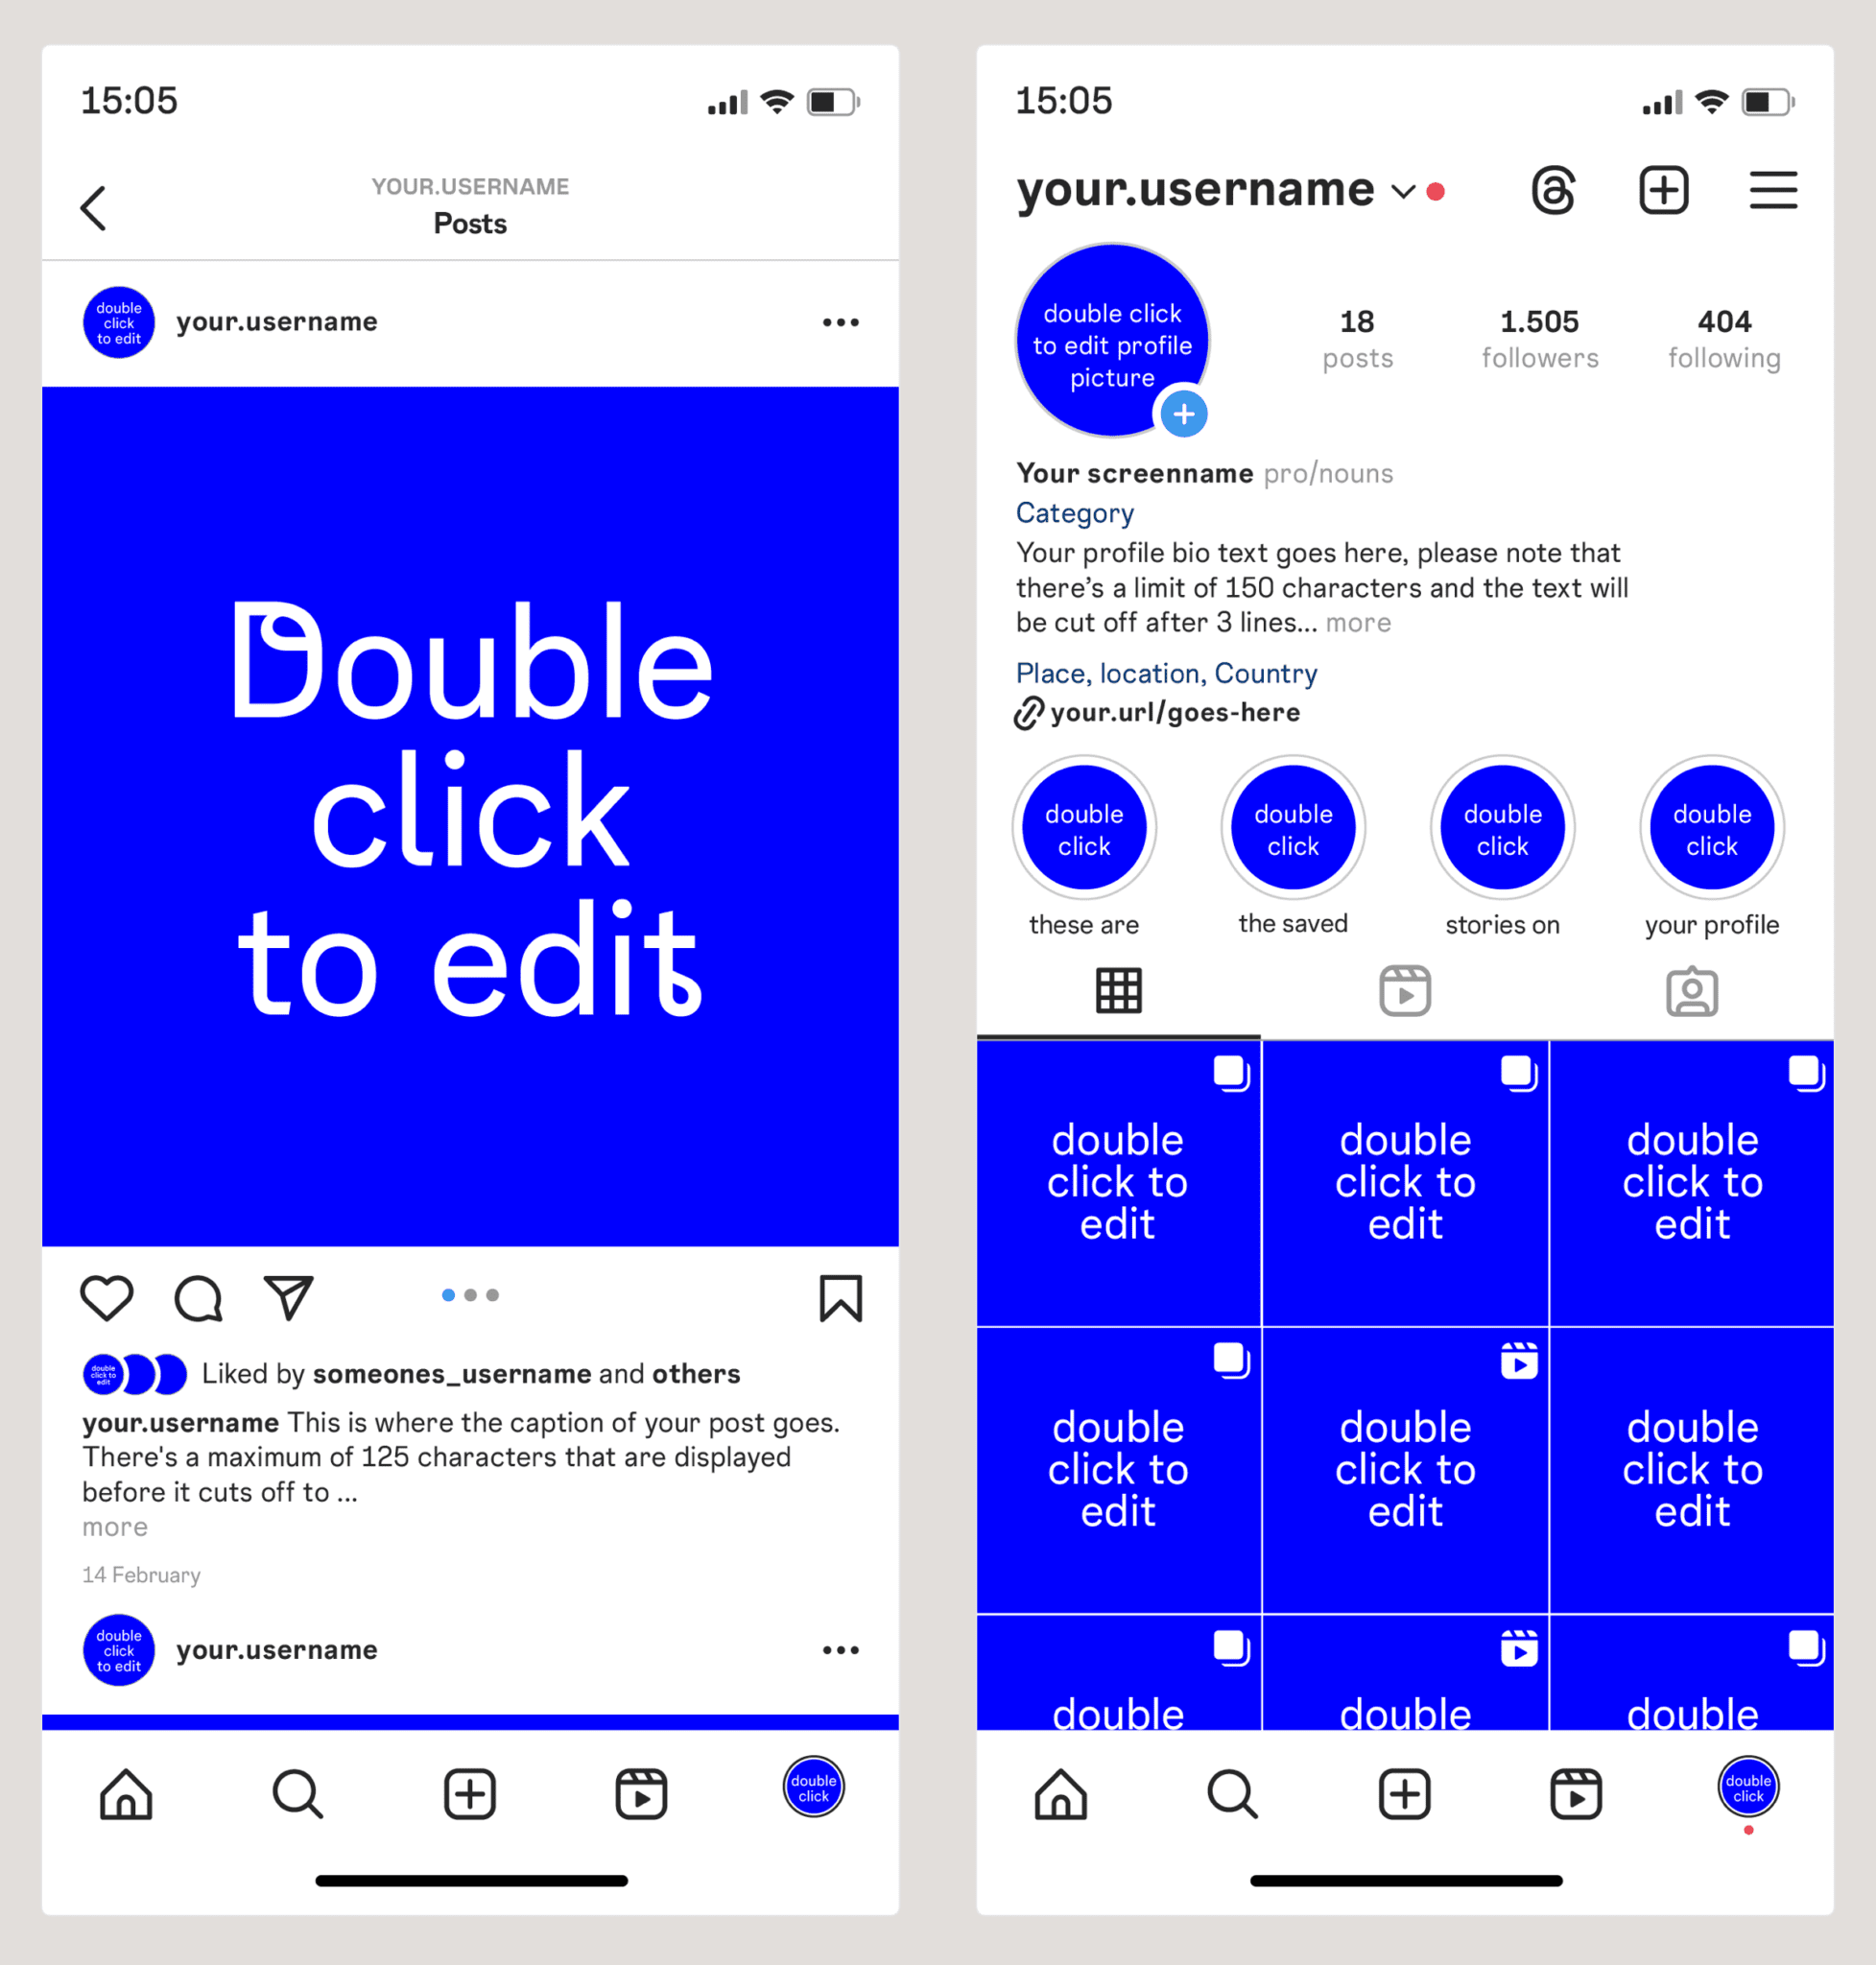 Two templates from Instagram's Post and Profile pages in light mode.